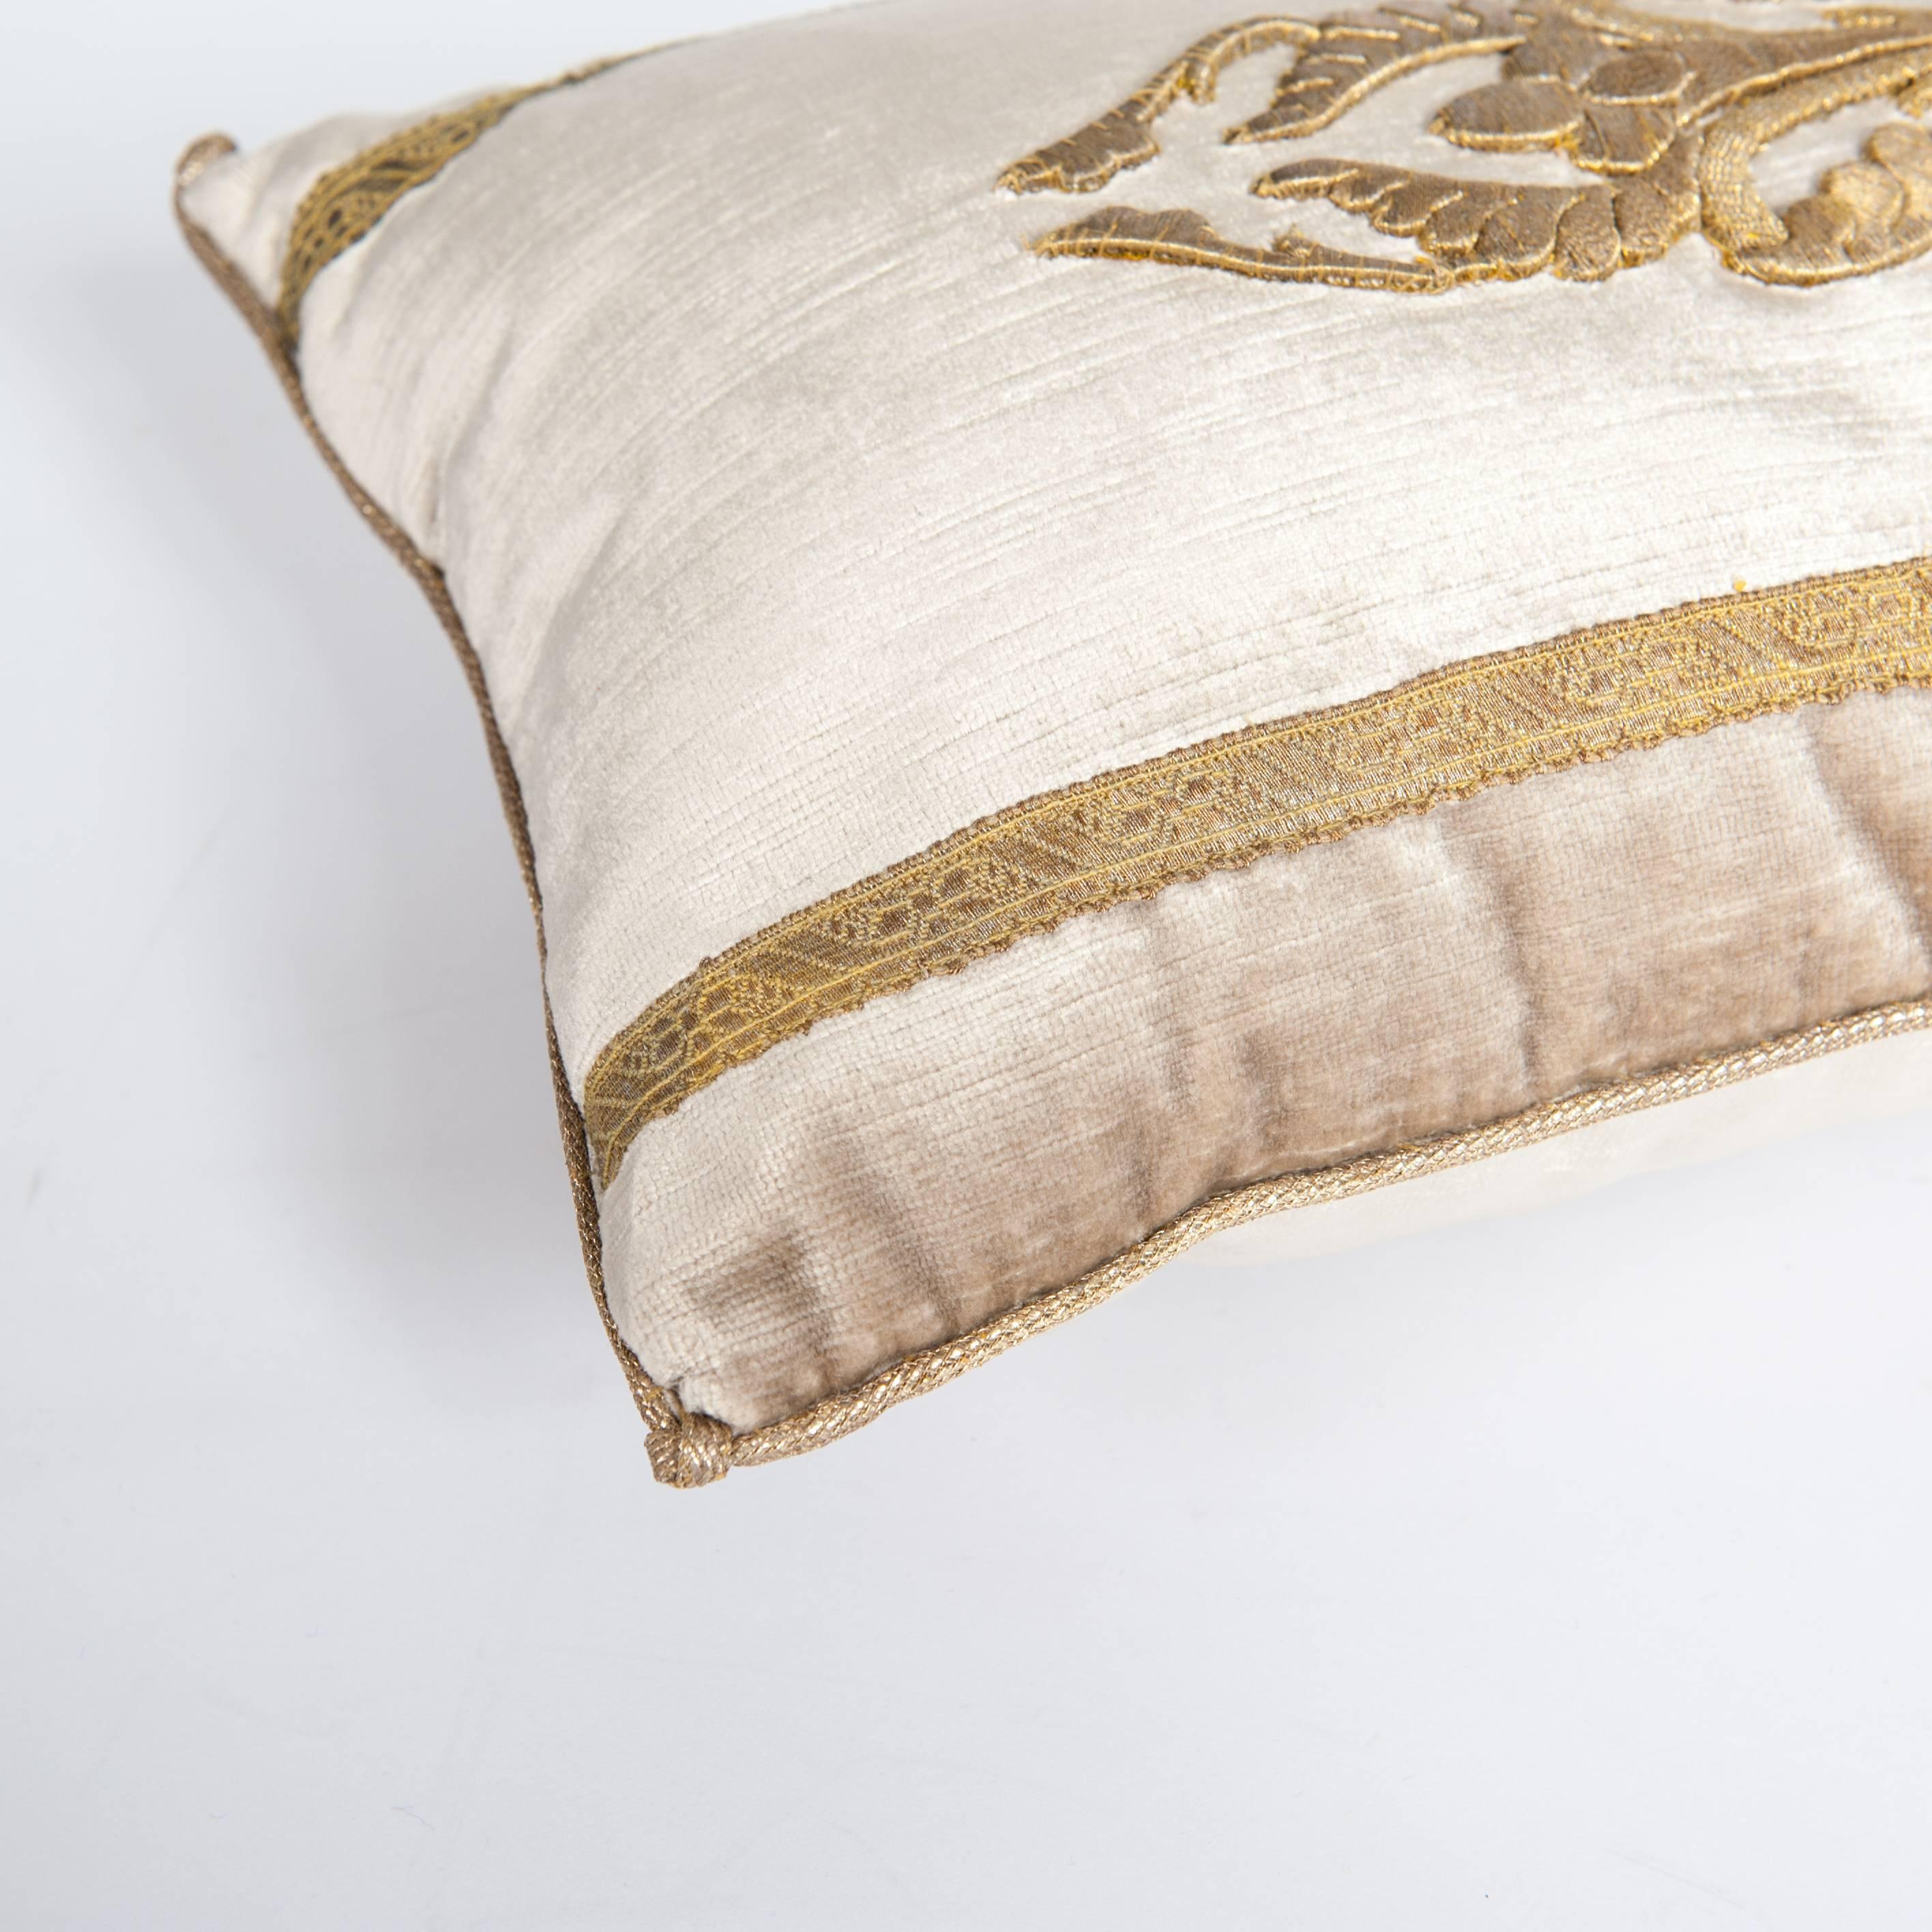 Pair of Champagne-Beige Colored Velvet Pillows with Antique Metallic Embroidery 1